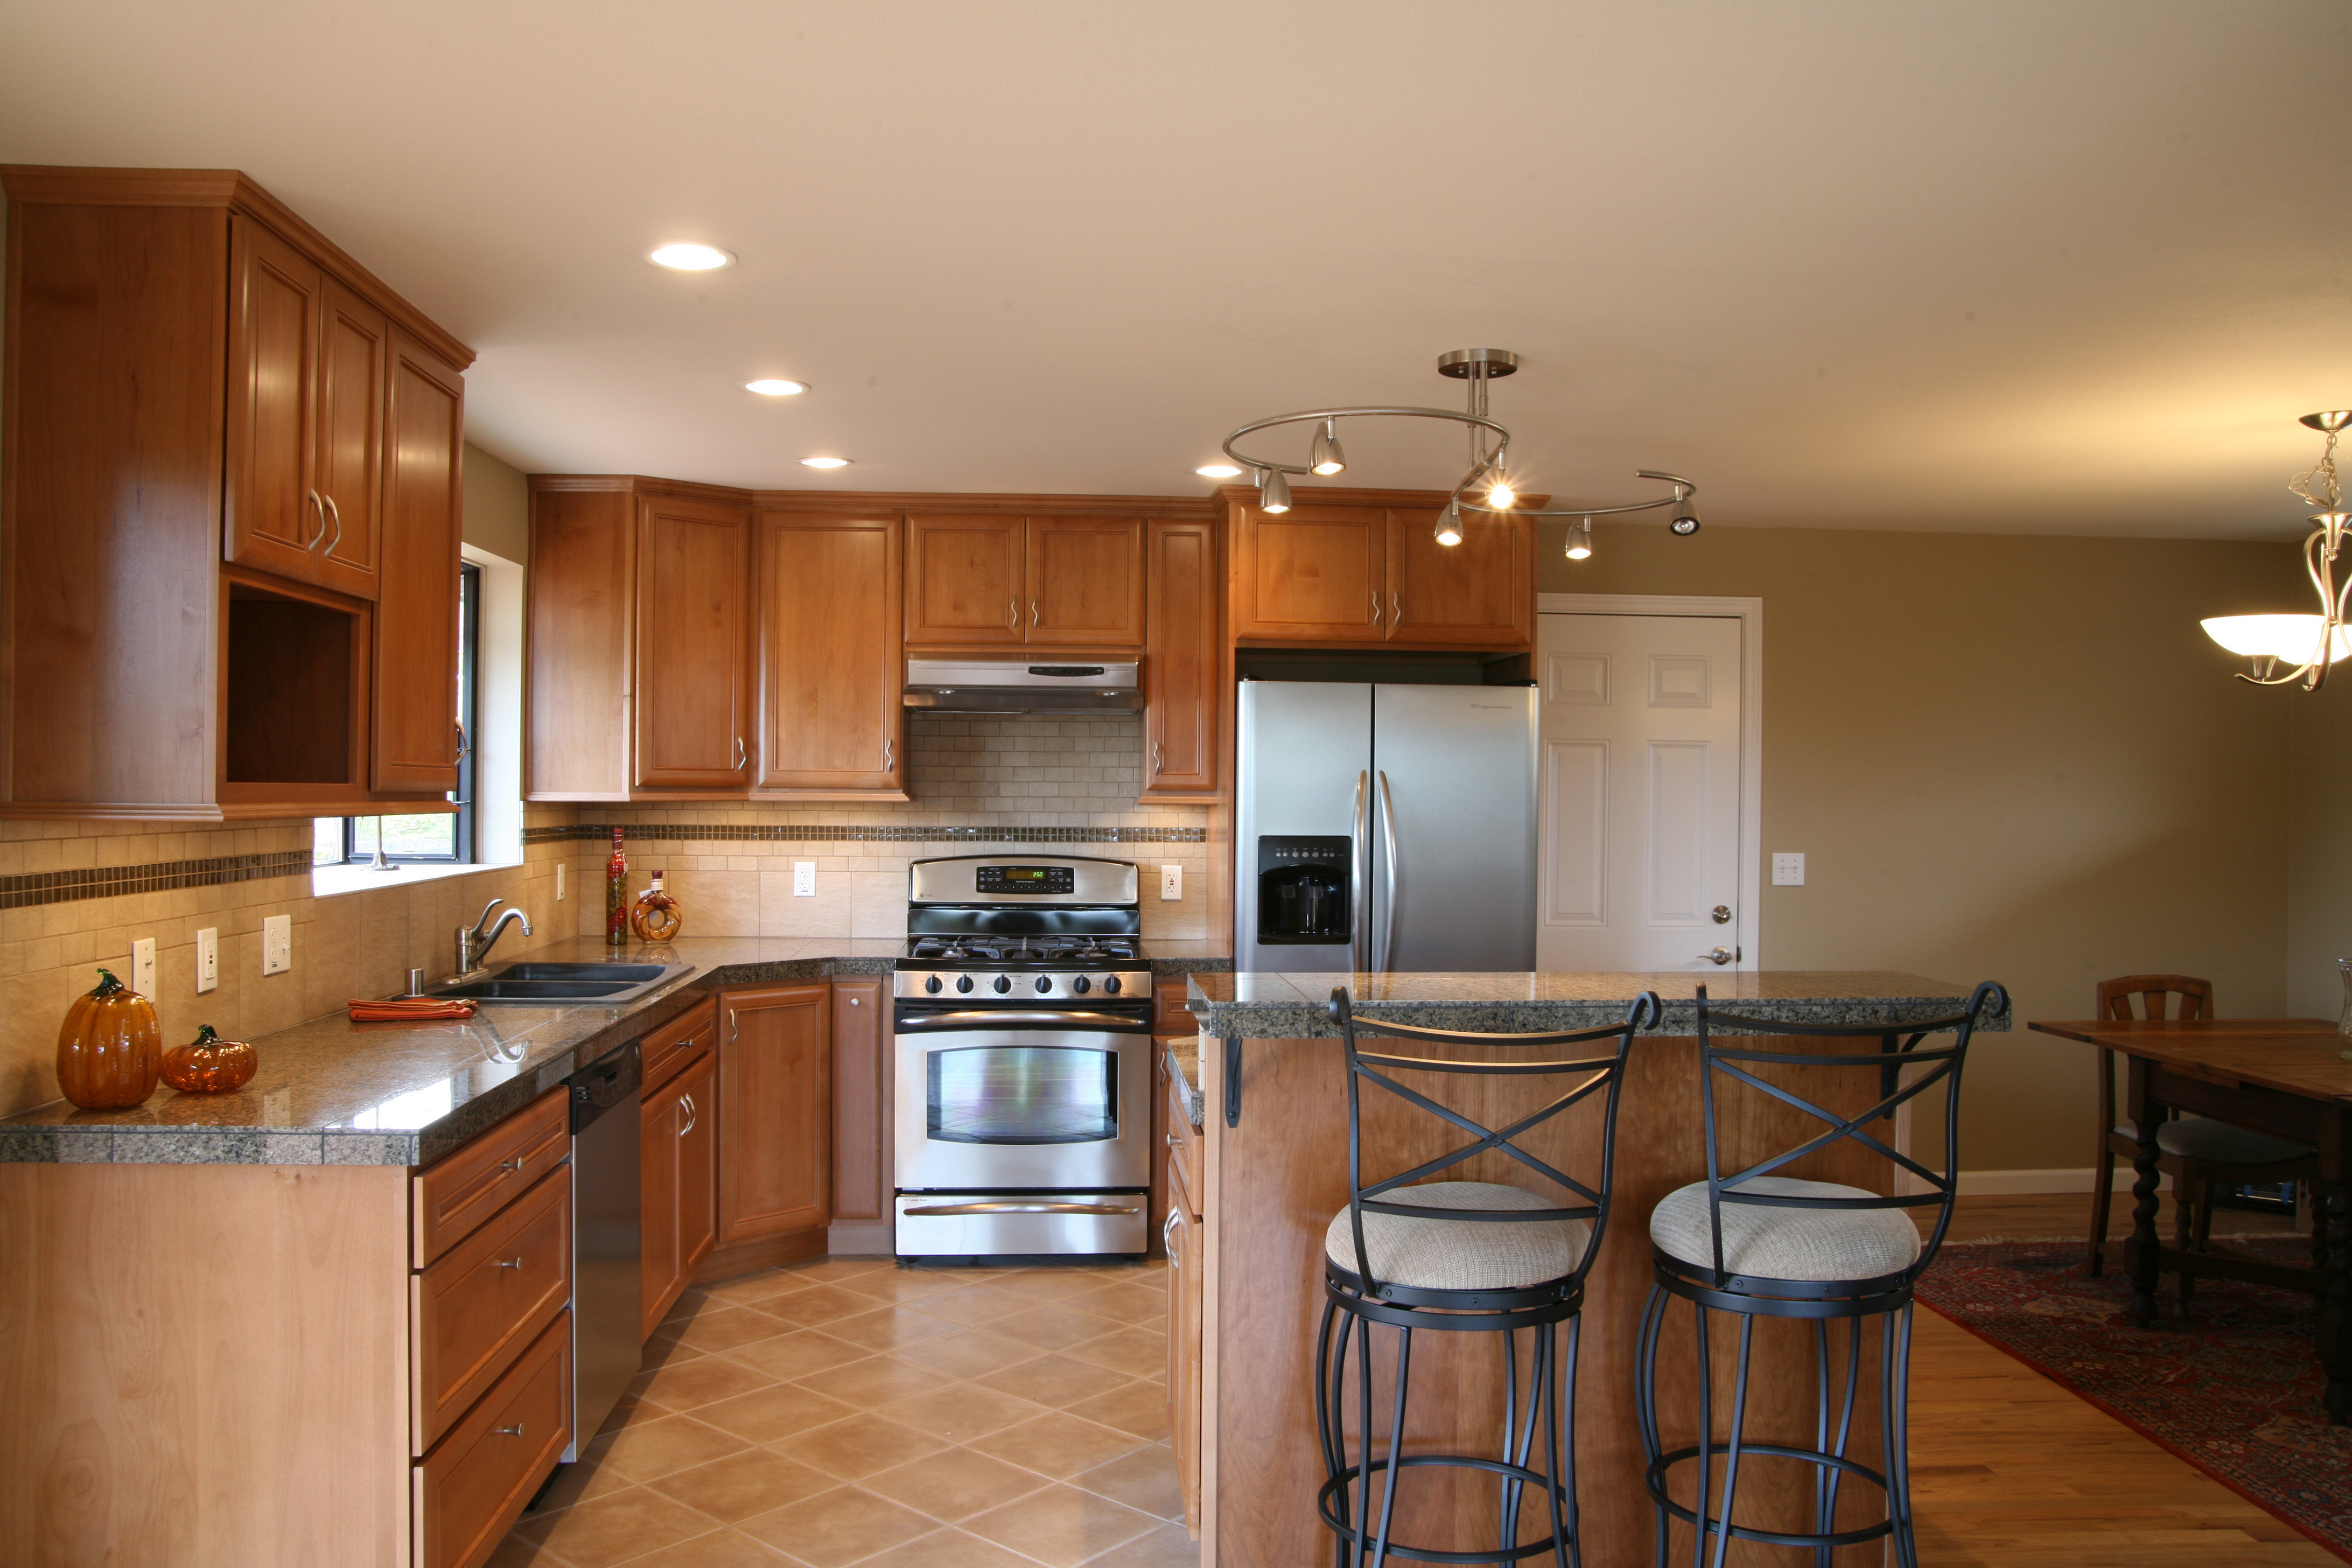 Add value to your home with Upscale Kitchen Remodeling